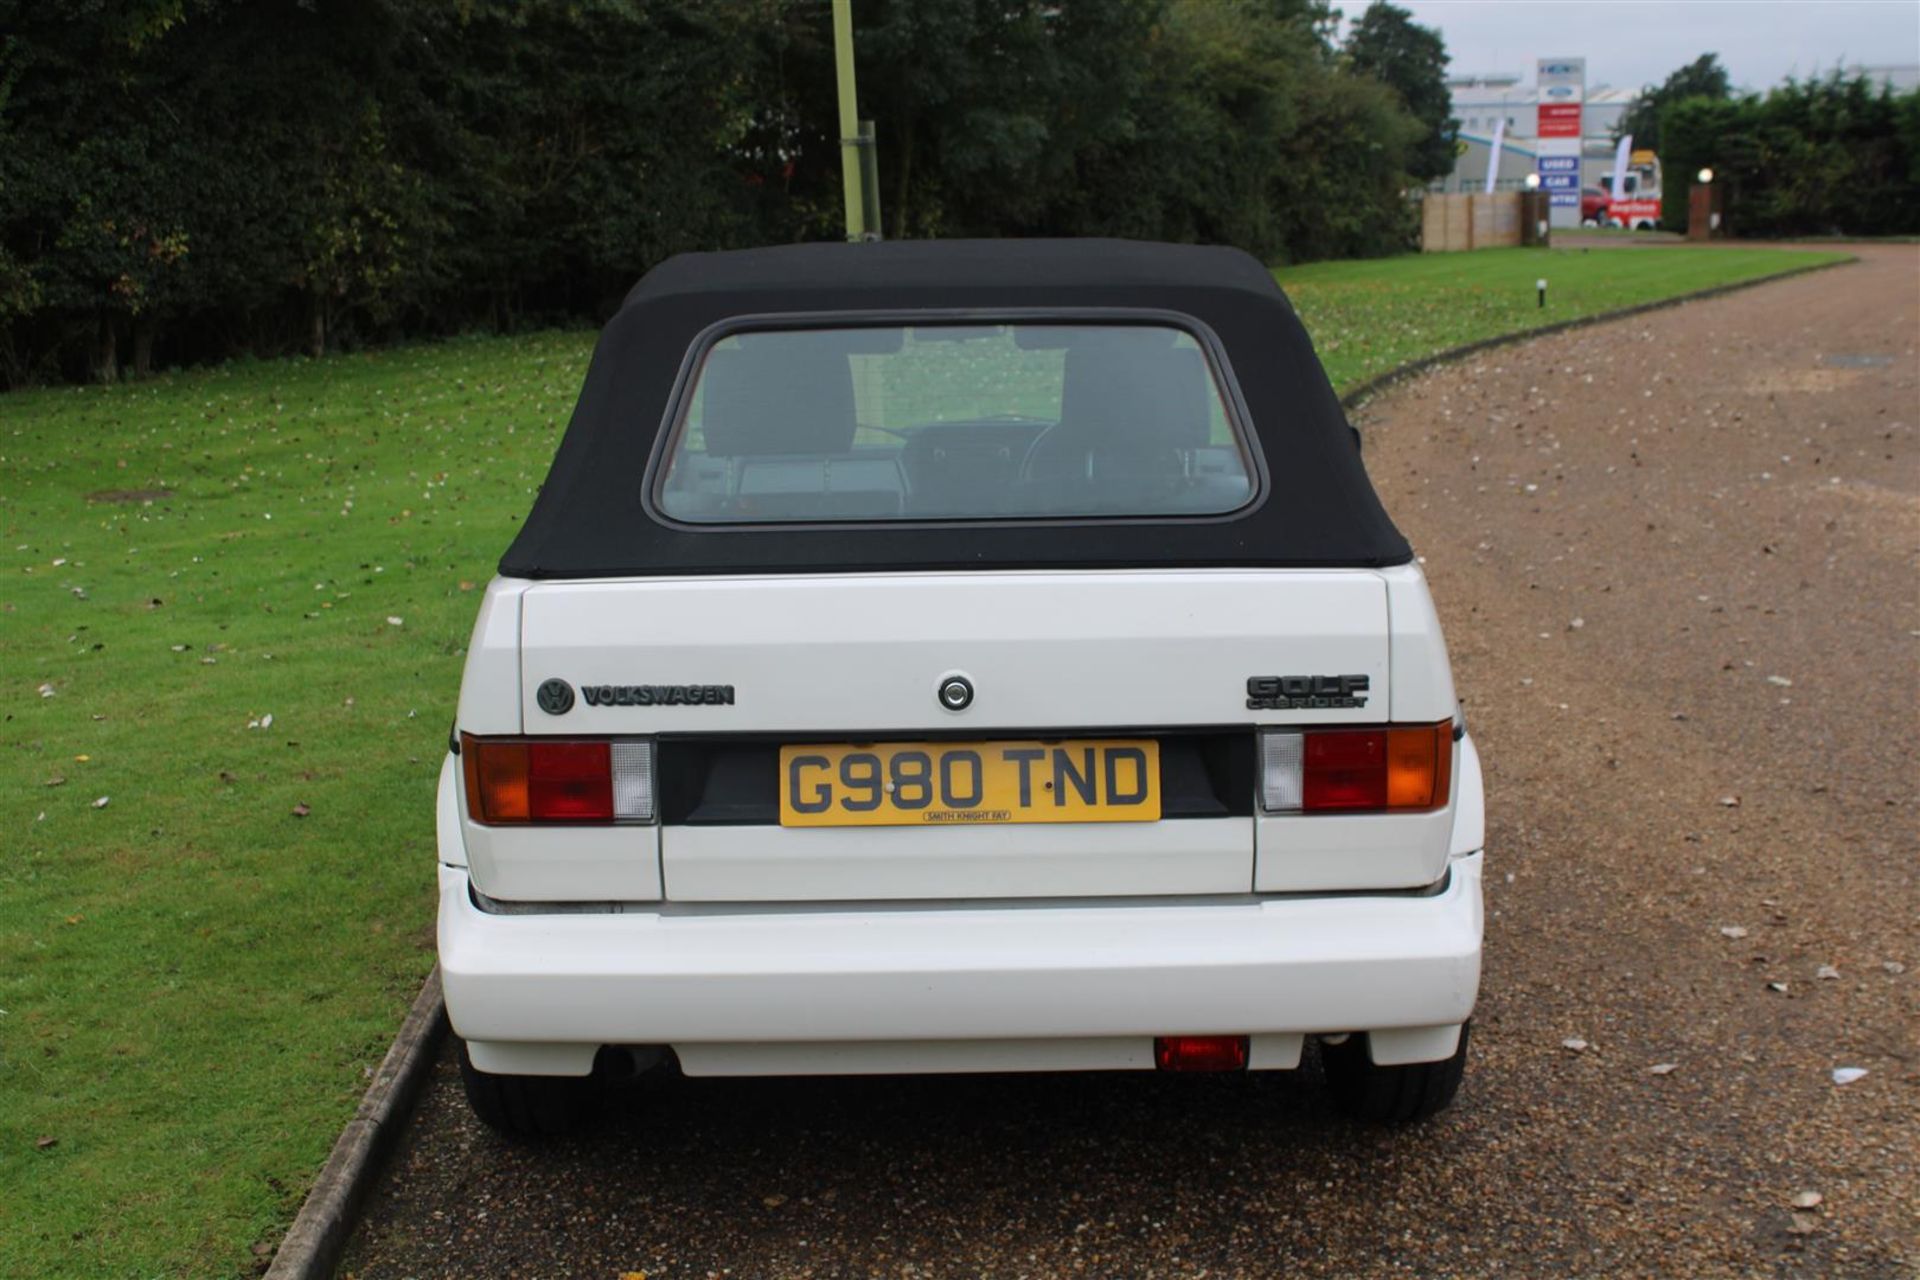 1989 VW Golf 1.8 Clipper Cabriolet Auto - Image 17 of 27